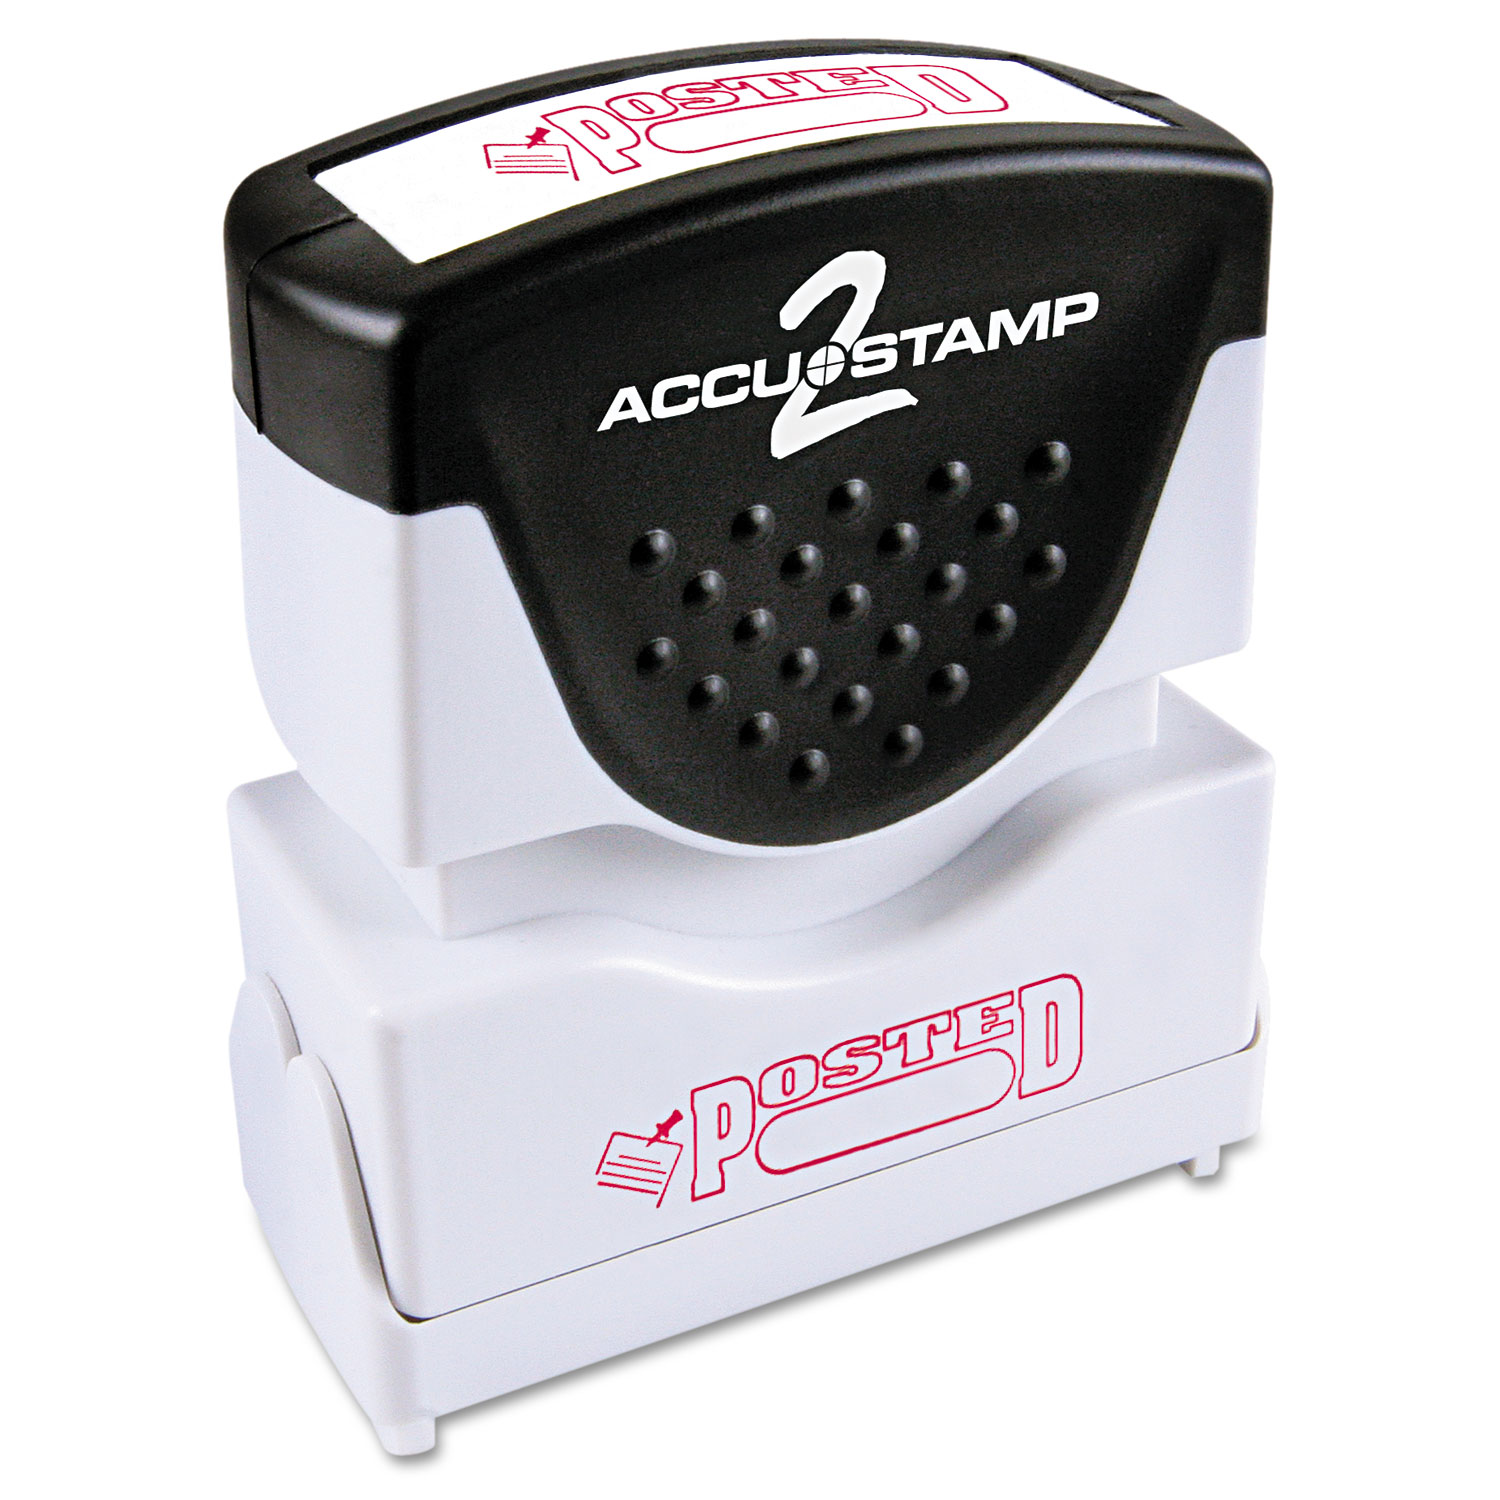  ACCUSTAMP2 035580 Pre-Inked Shutter Stamp, Red, POSTED, 1 5/8 x 1/2 (COS035580) 